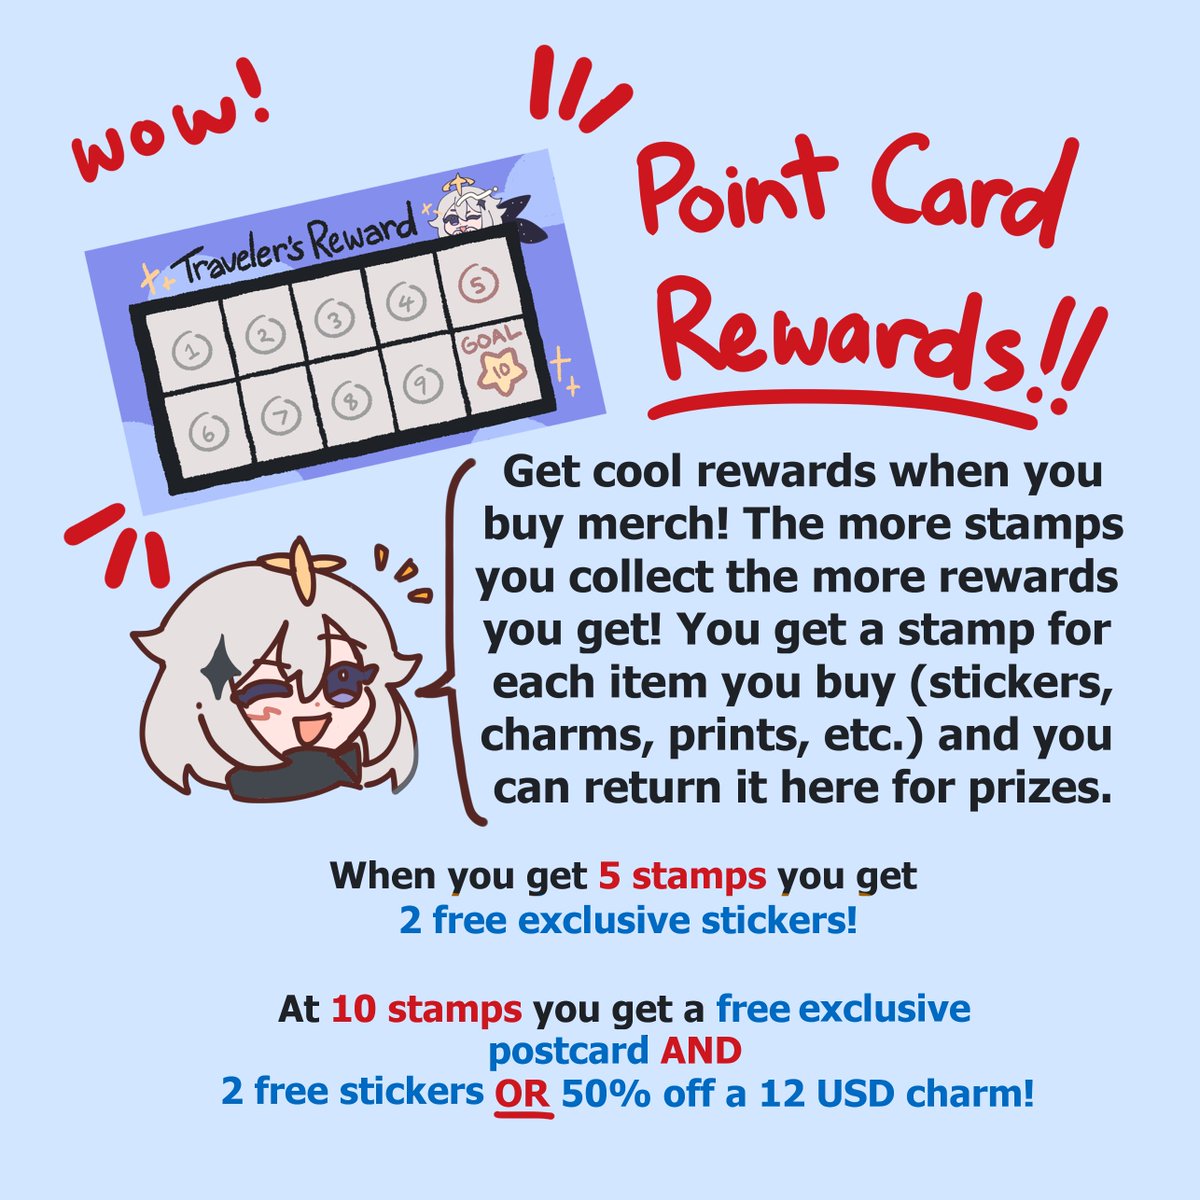 Traveler's Reward Point Card [LIMITED AMOUNT!!!!]
I have only a limited supply of these point reward cards, but if you get one you can get exclusive merch that isn't available to buy!!! More info in first image!! 